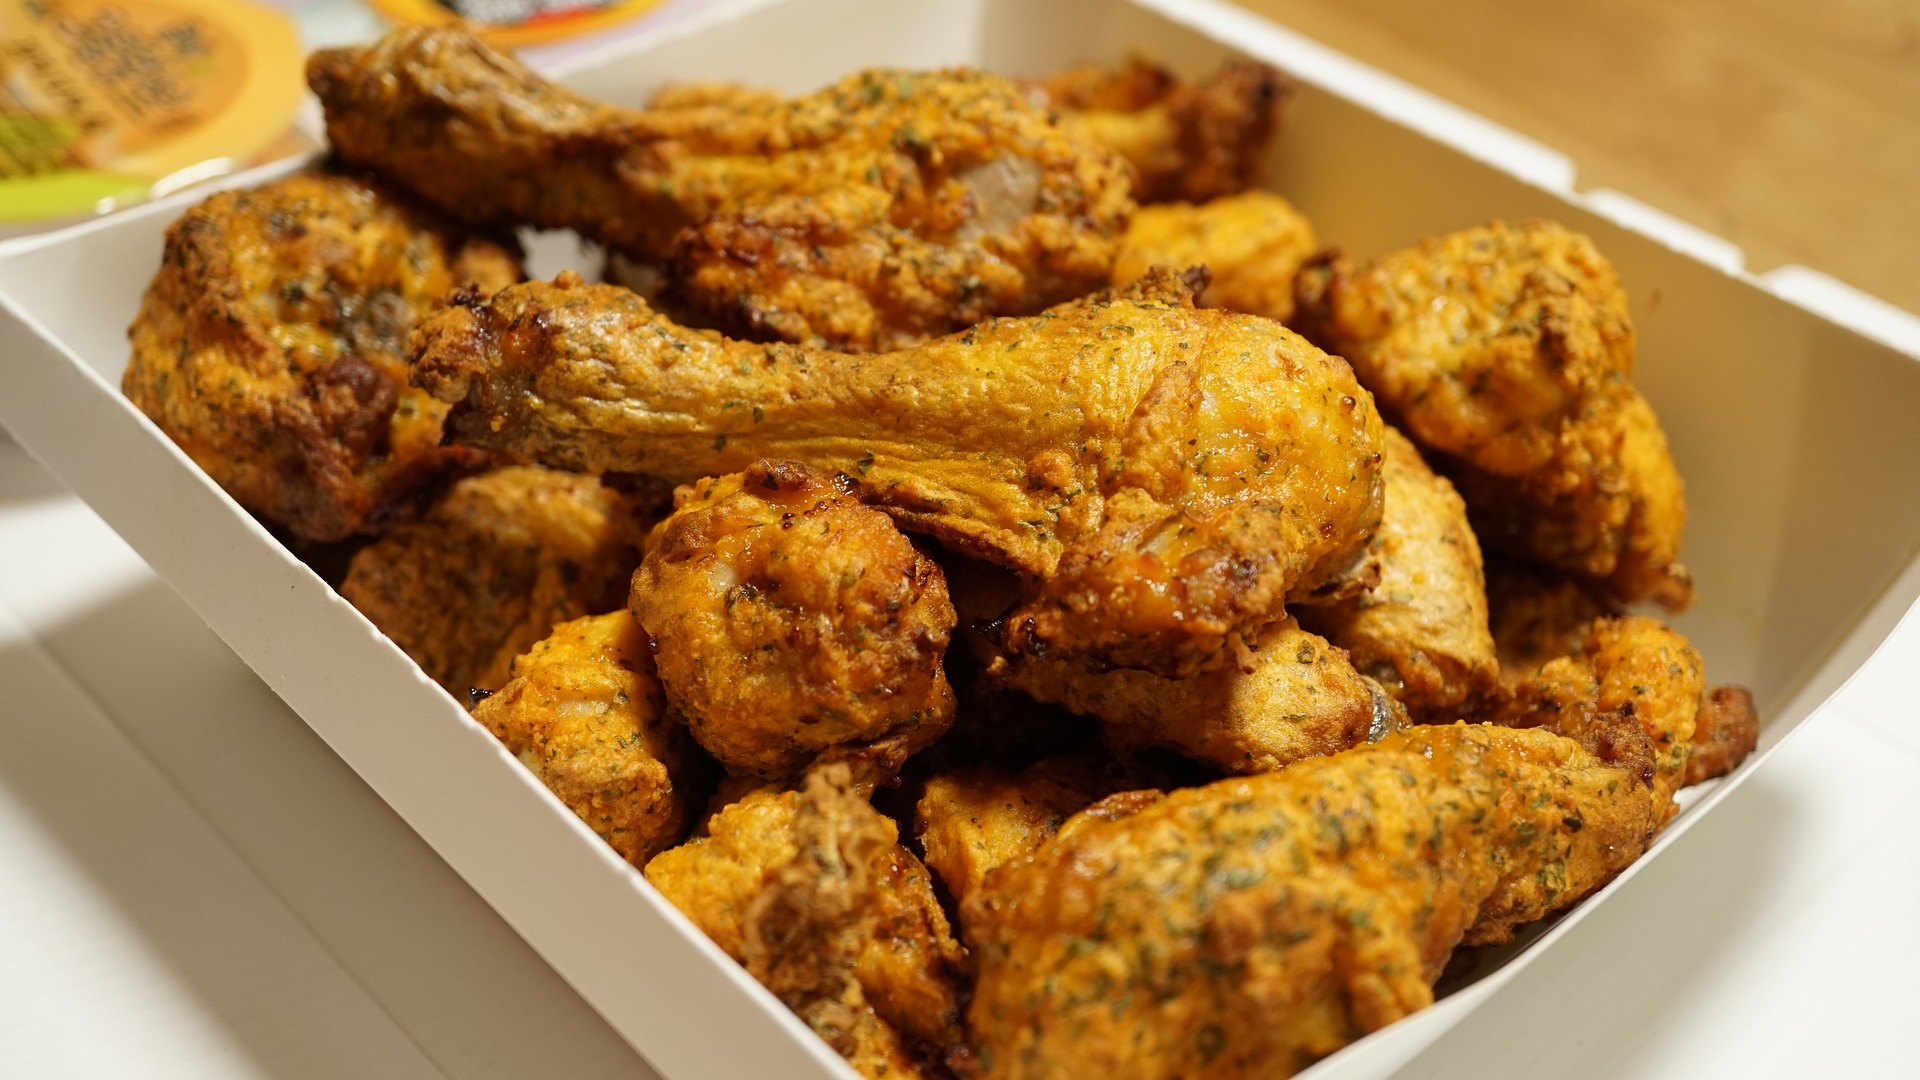 Chicken Drumsticks in a takeaway container; chicken is a common cause of food poisoning, which our No Win No Fee solicitors can assist with a claim for.